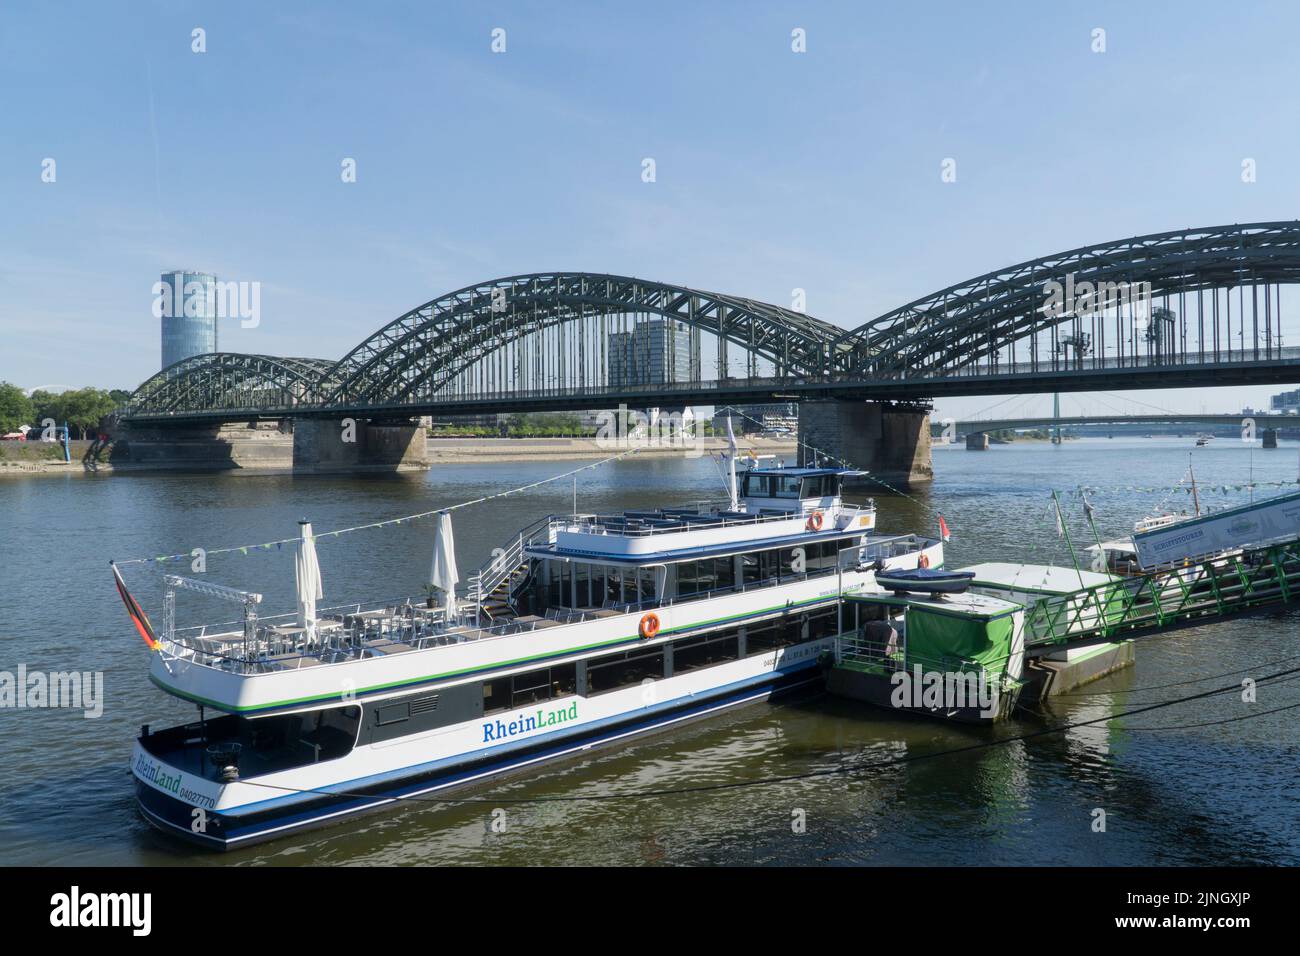 Cologne, Germany, 11 August 2022: The river Rhine is at unusually low levels with lots of bare bank exposed due to the drought and heatwave affecting much of Western Europe. Tourist boats are able to manage well but larger ships carrying, for instance salt from Heilbronn to Cologne, are reducing their loads from their usual 2,200 metric tons to 600 tons so they float higher and avoid grounding in the shallow water. The German economy is more reliant on inland waterways for transport than other Western European countries. Anna Watson/Alamy Live News Stock Photo